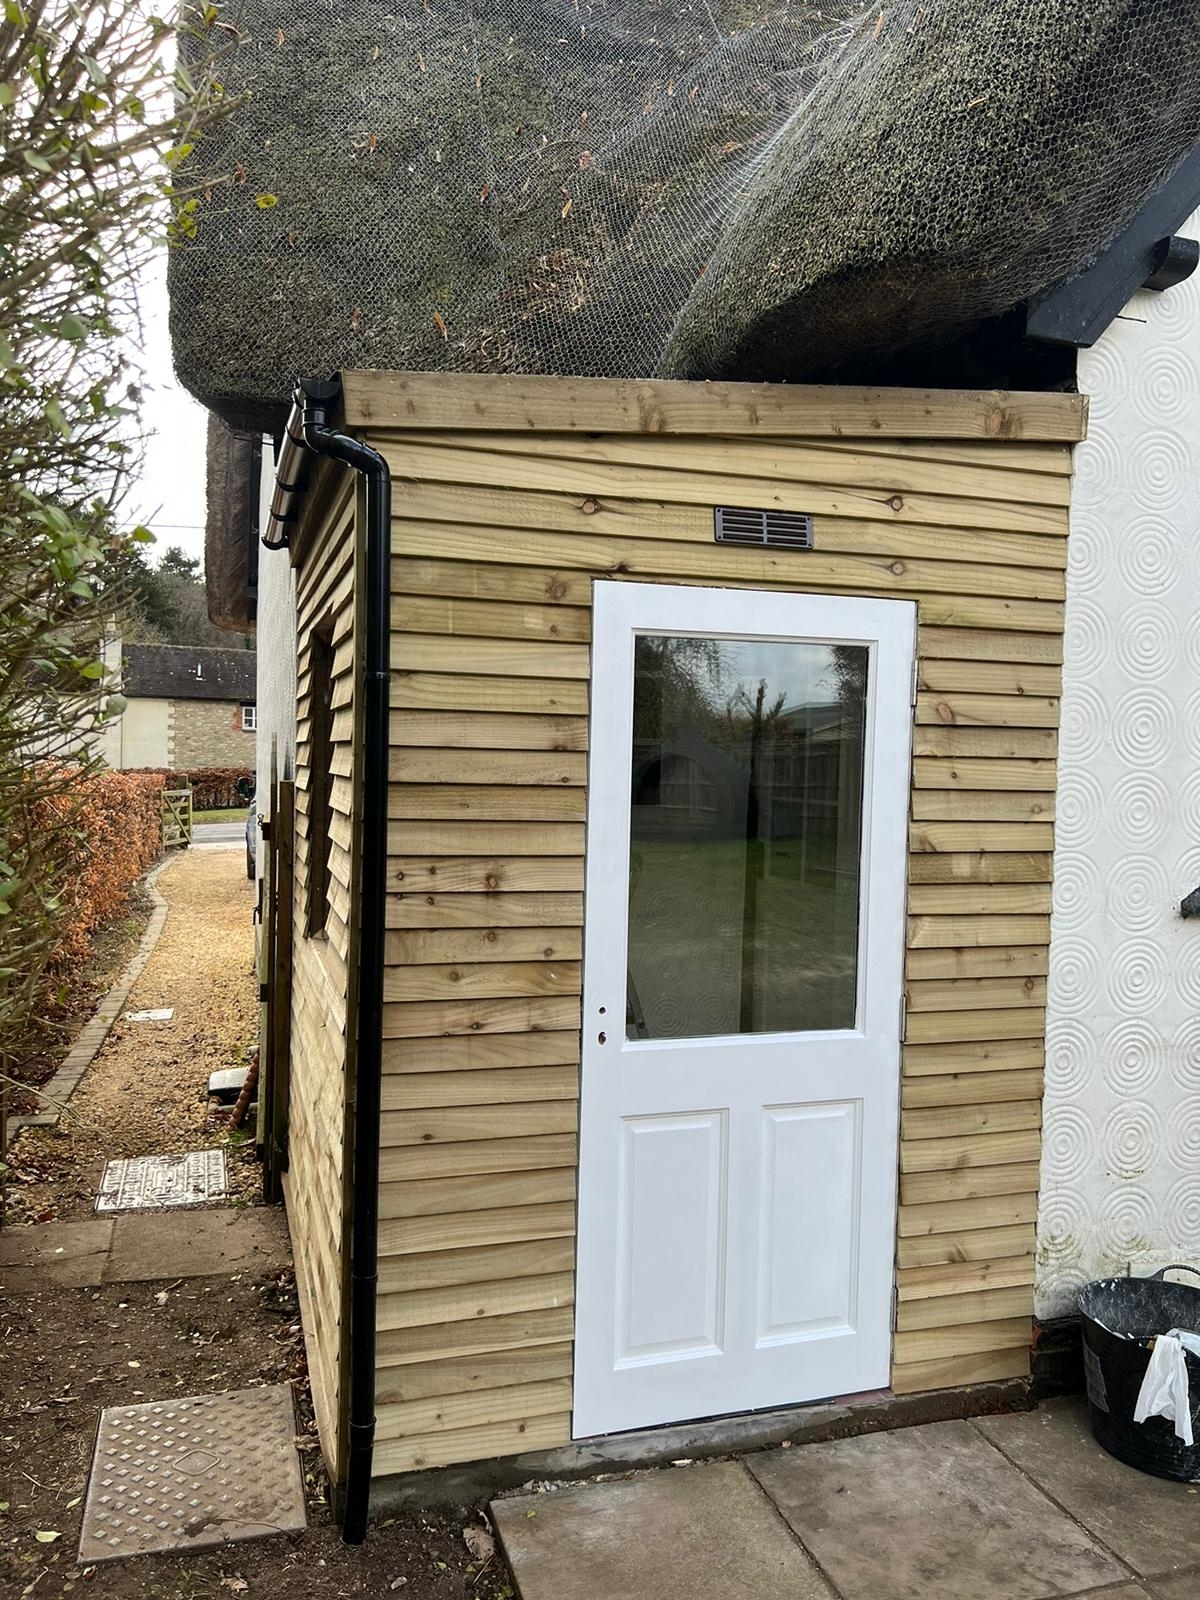 Lean To Project Abingdon Oxon 018 Xlarge